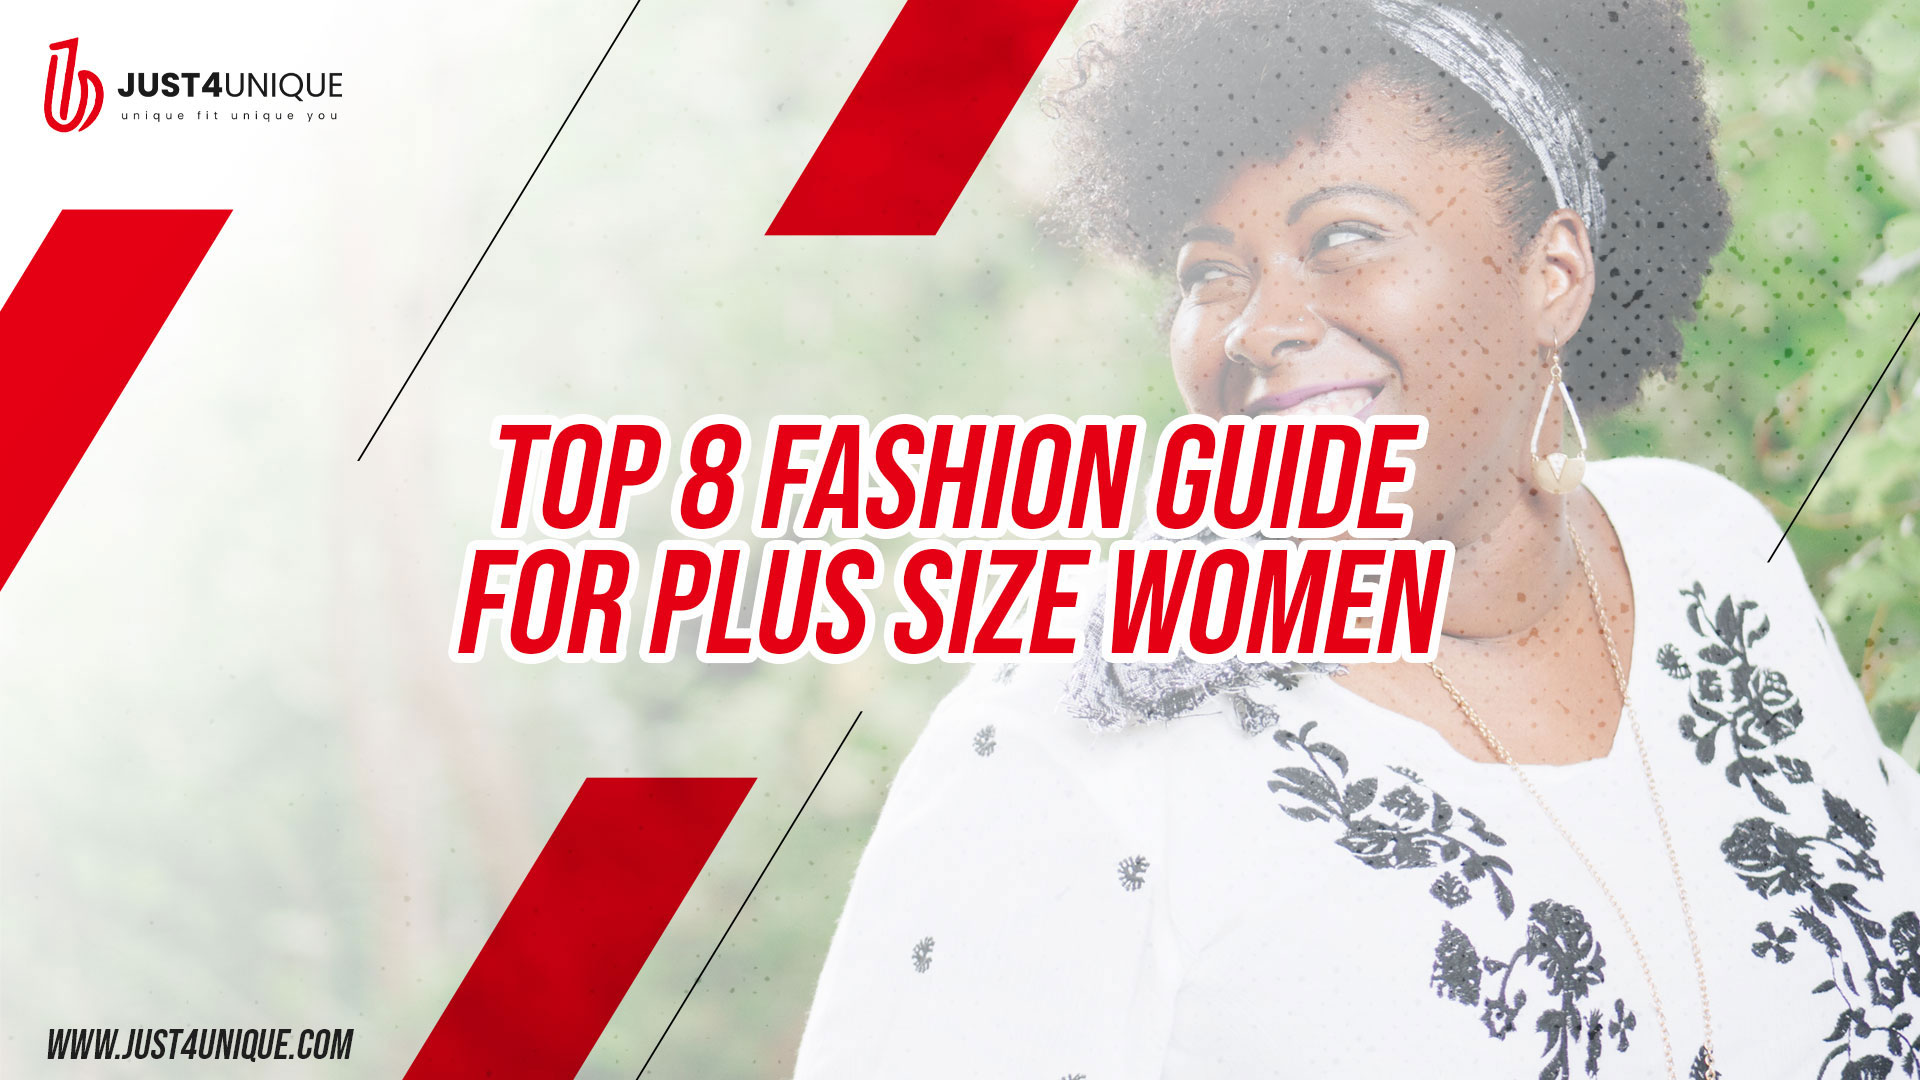 Top 8 Fashion Guide for Plus Size Women